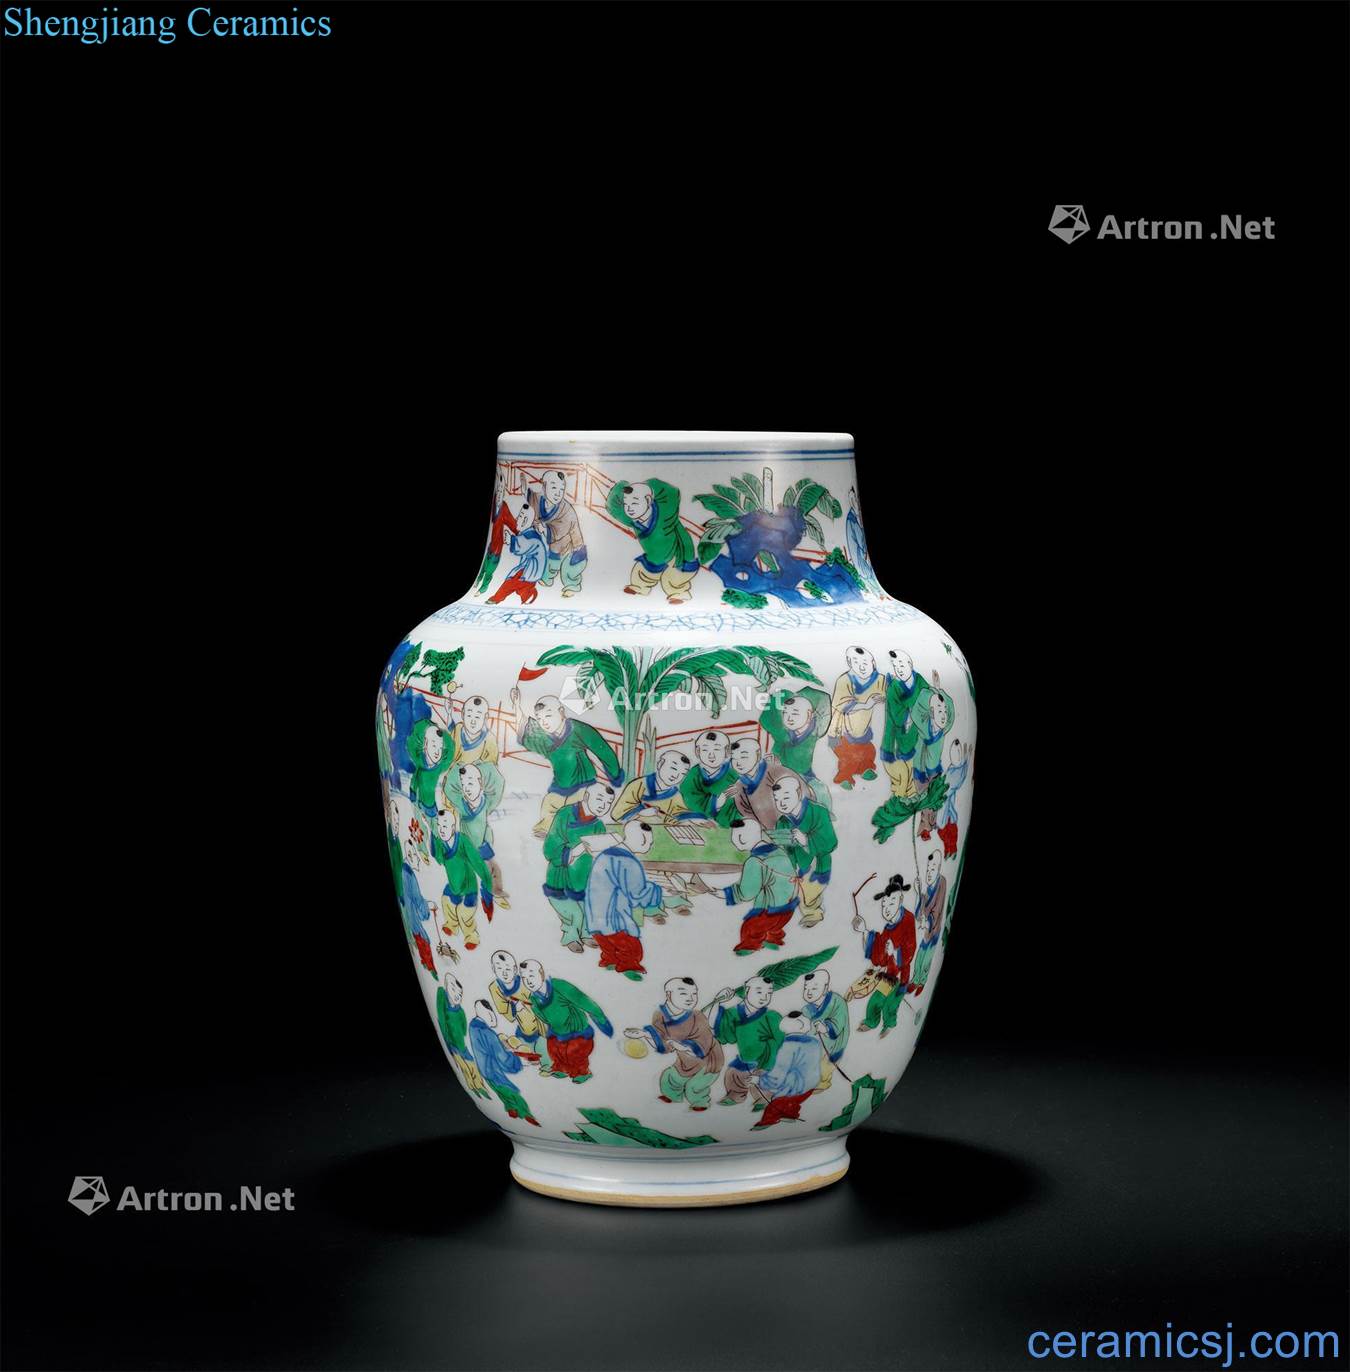 The late Ming dynasty Colorful ZiWen cans